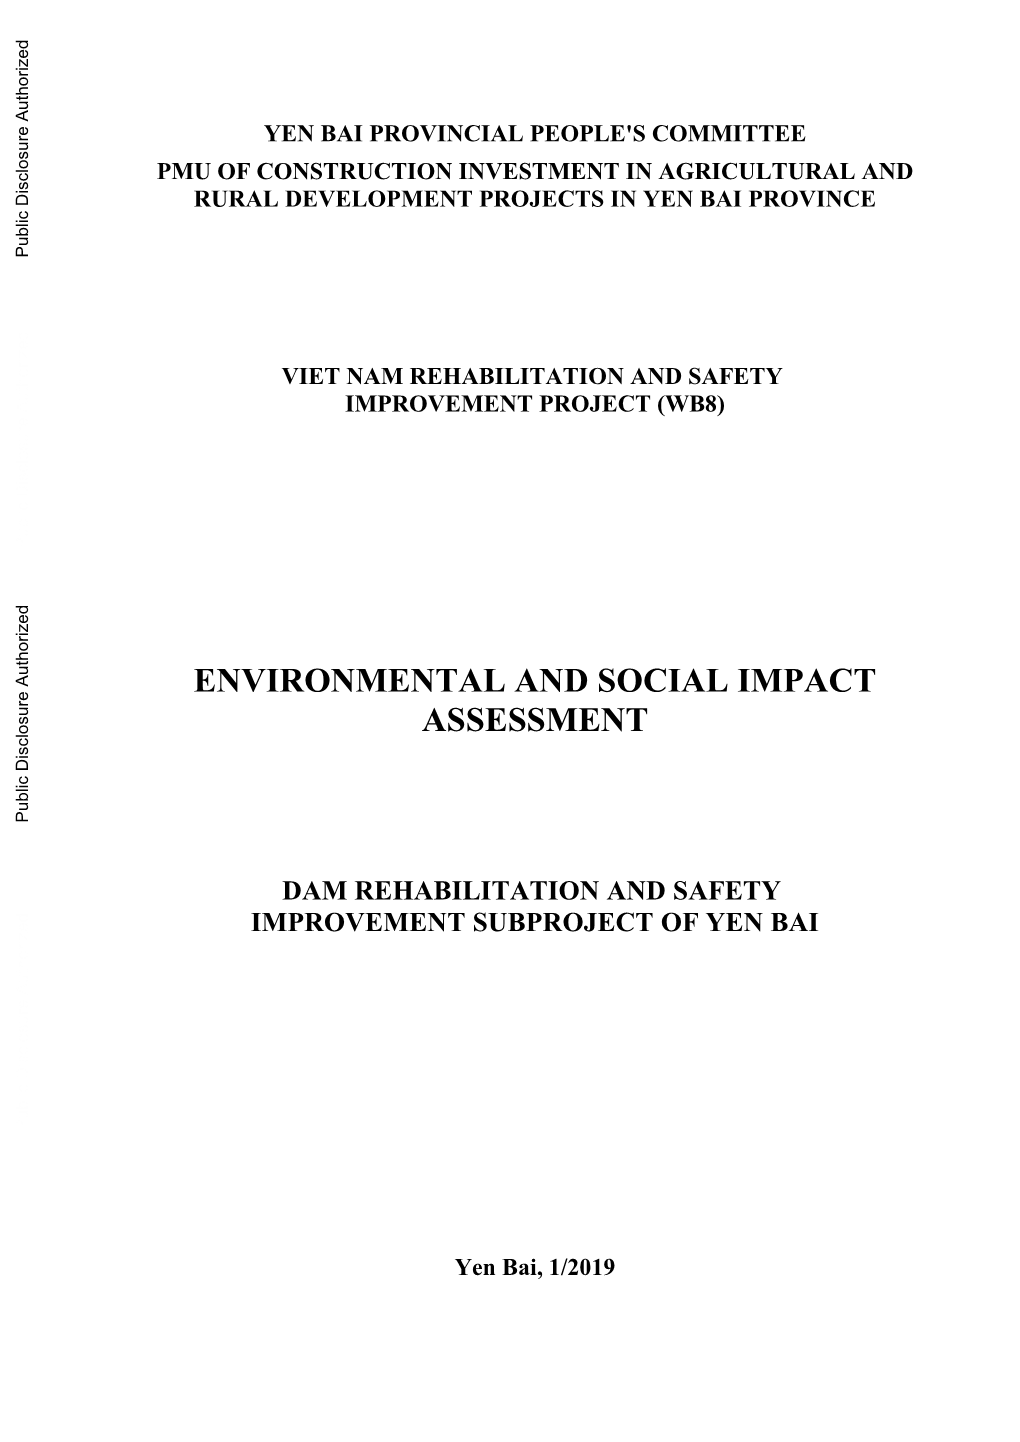 195 7.6.1 Contractor's Social and Environmental Management Plan